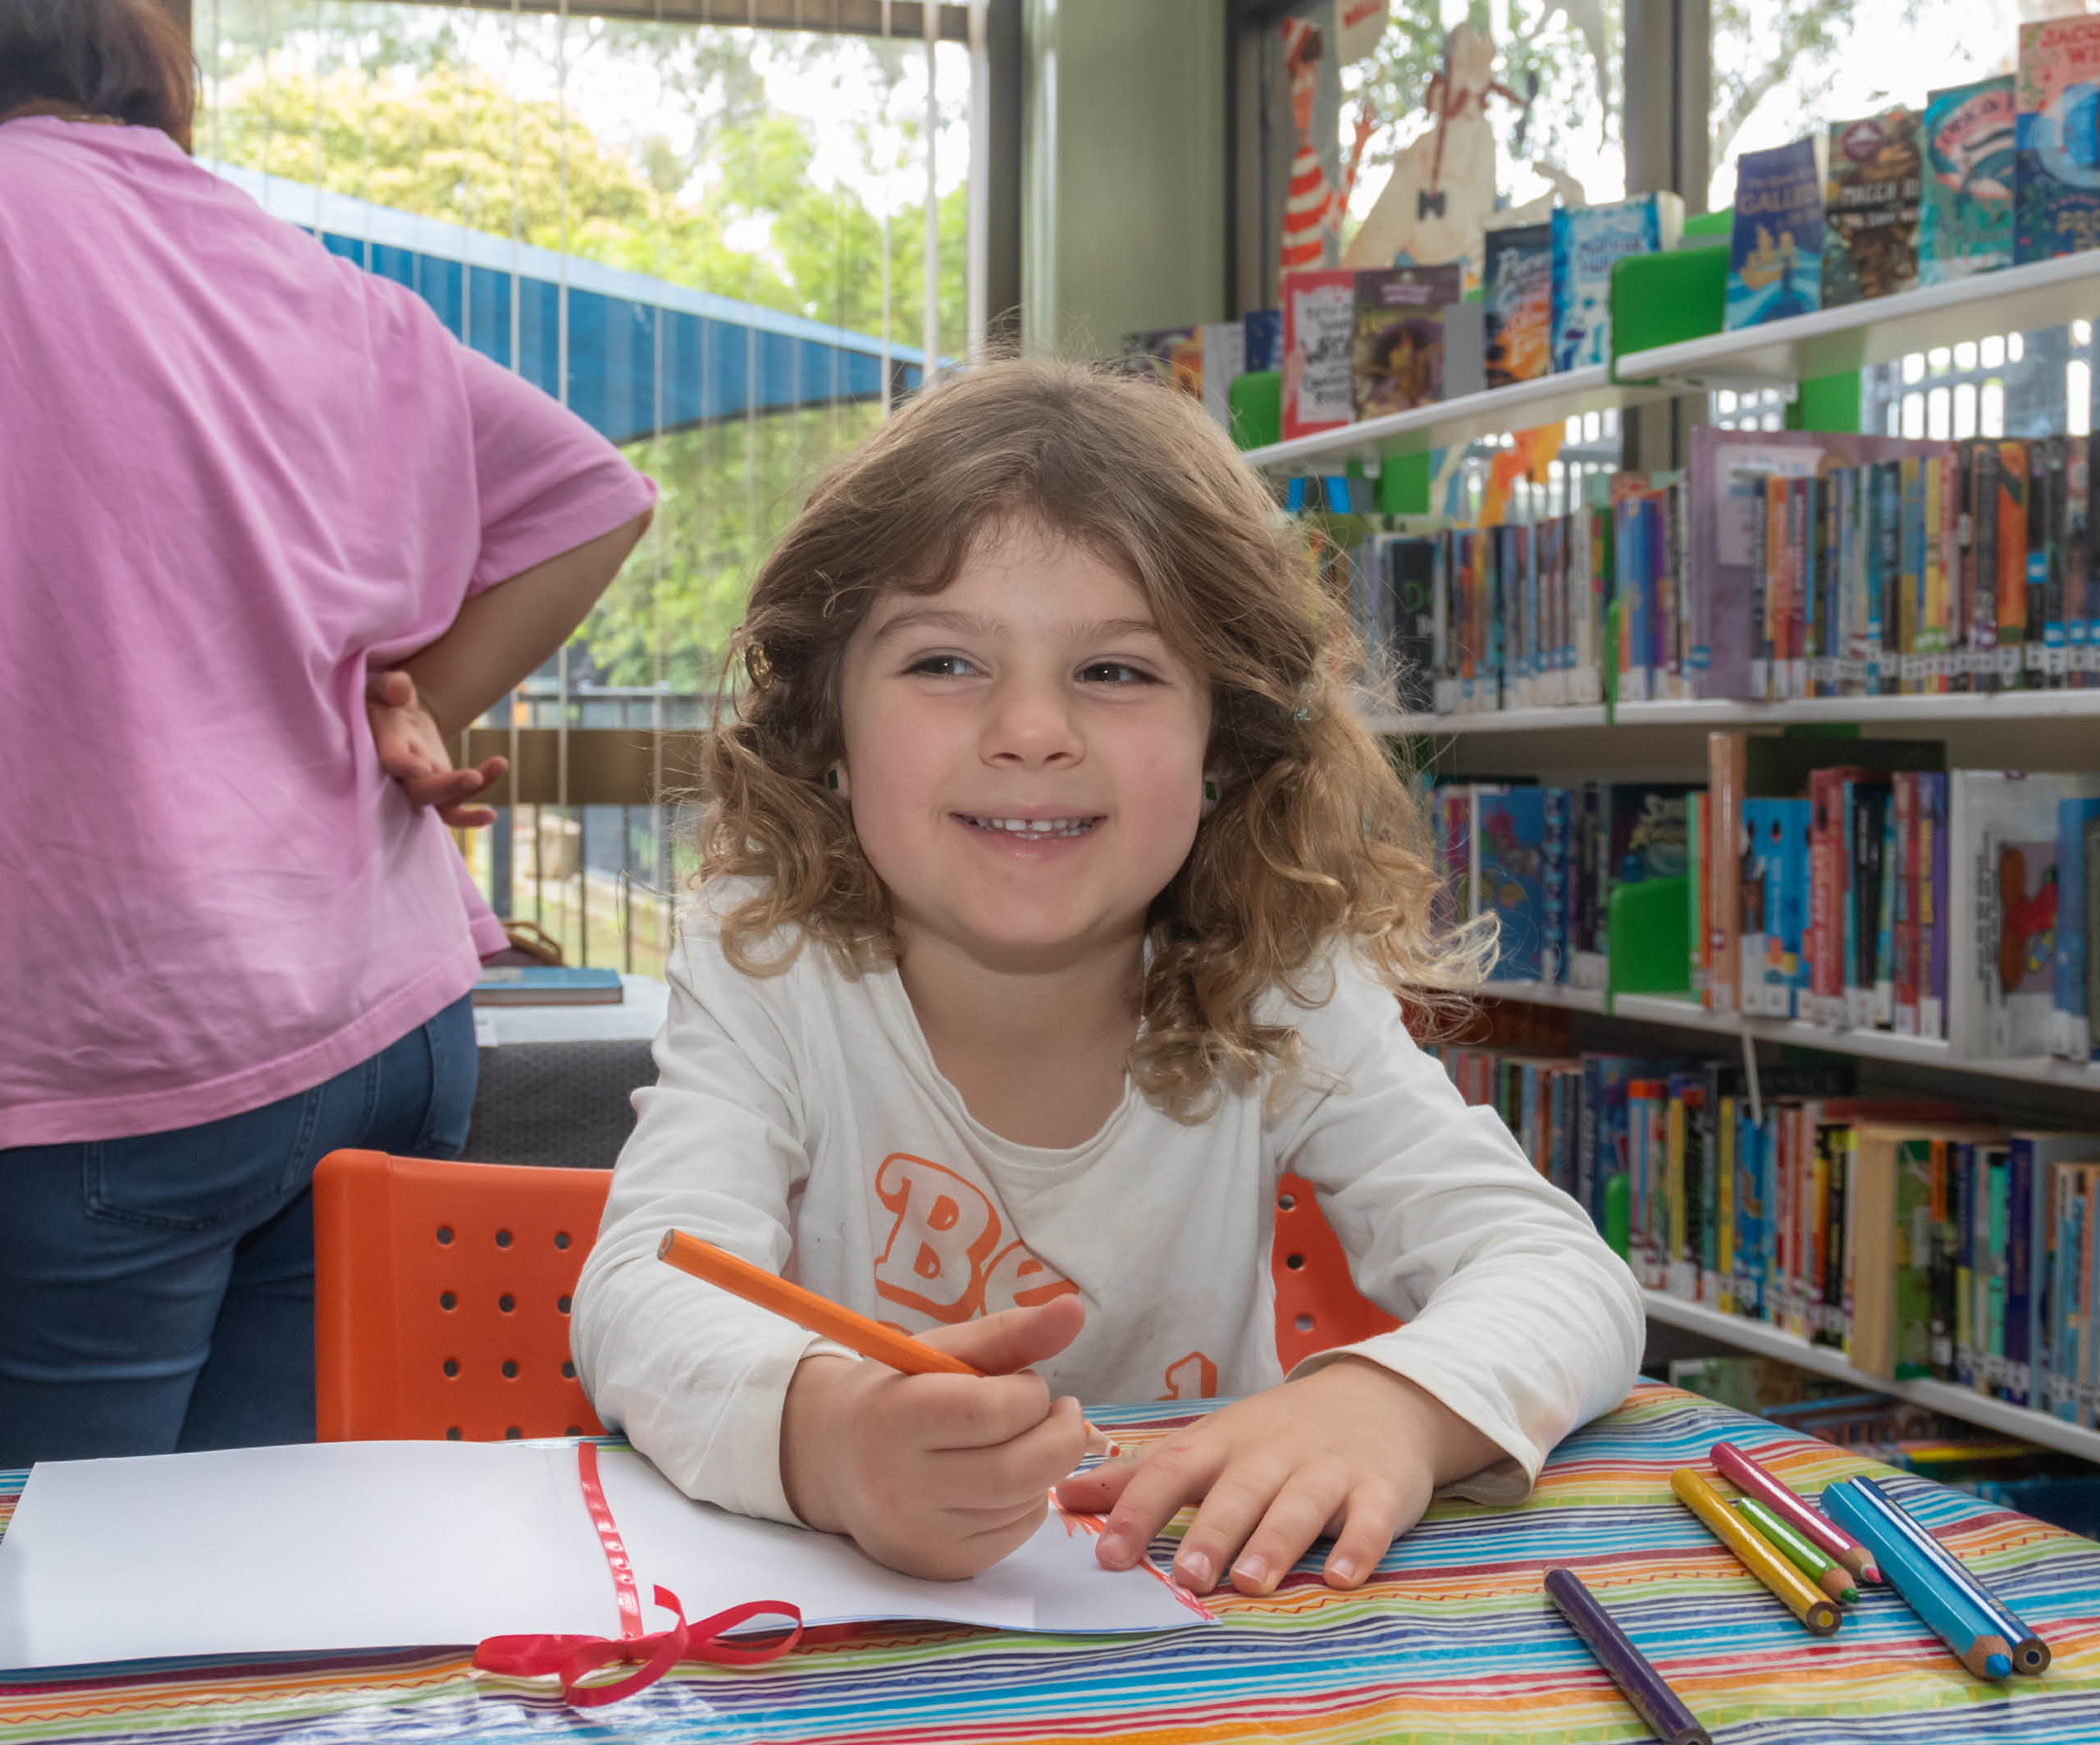 Storytime is held at Caringbah Library on Tuesday mornings at 10:30am during school terms for children and parents. Suitable for children aged 3 years and up.